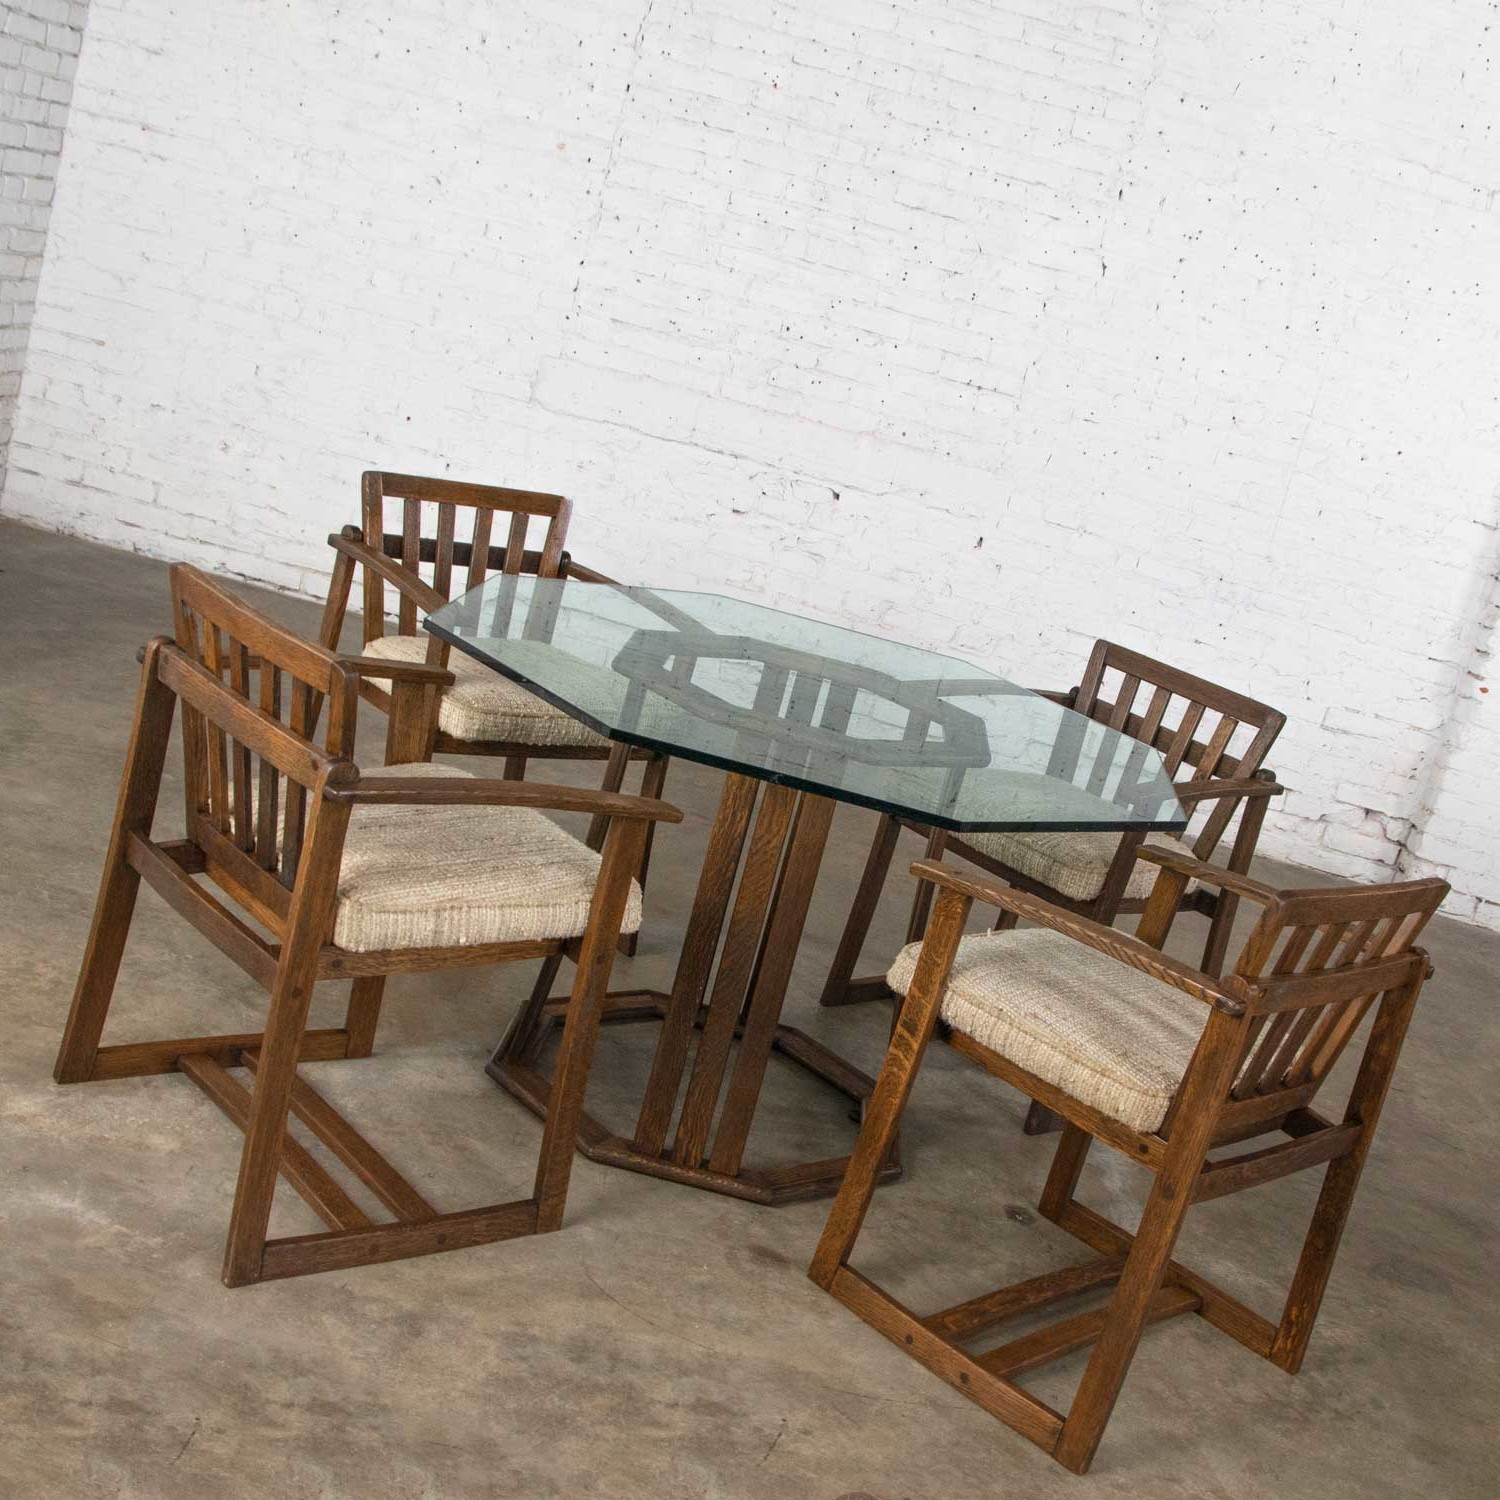 Vintage StavOak Dining Game Table & 4 Chairs from Jack Daniels’ Barrel Staves by Jobie G. Redmond 1981